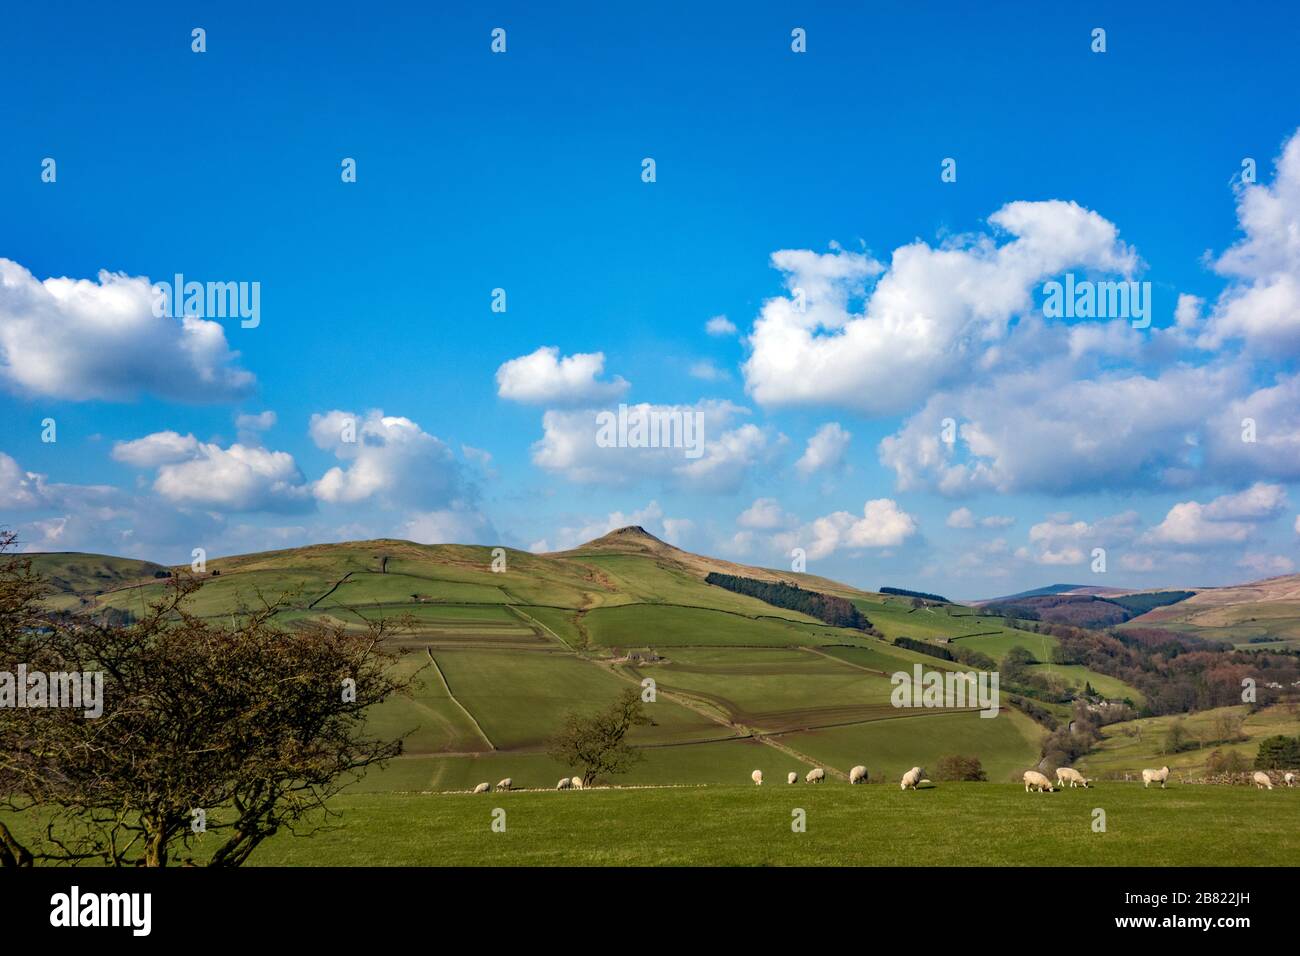 Sheep grazing bellow Shutlingsloe hill near the village of Wildboarclough in the Peak District  one of the highest points in Cheshire England Stock Photo